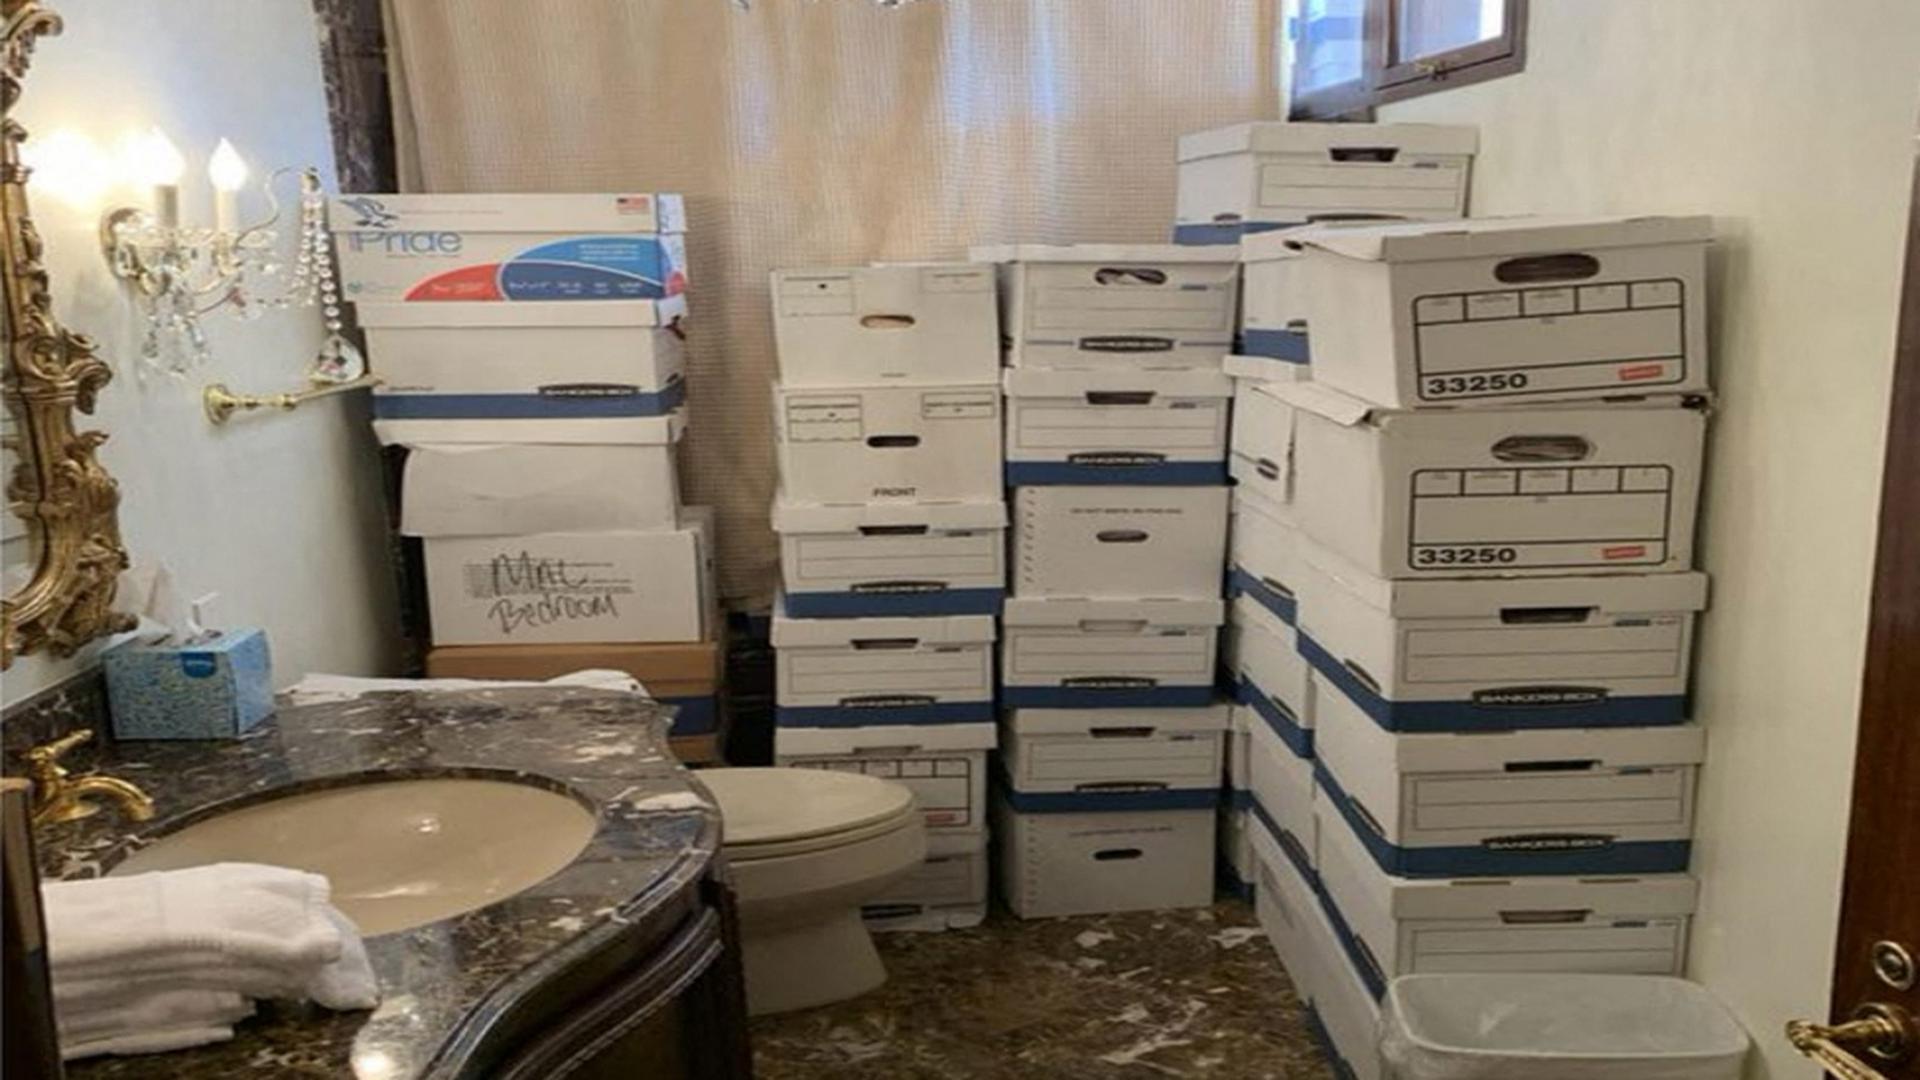 This undated image, released by the US District Court Southern District of Florida as evidence in the indictment, shows stacks of boxes in a bathroom and shower at the Lake Room at Mar-a-Lago, the former president's private club